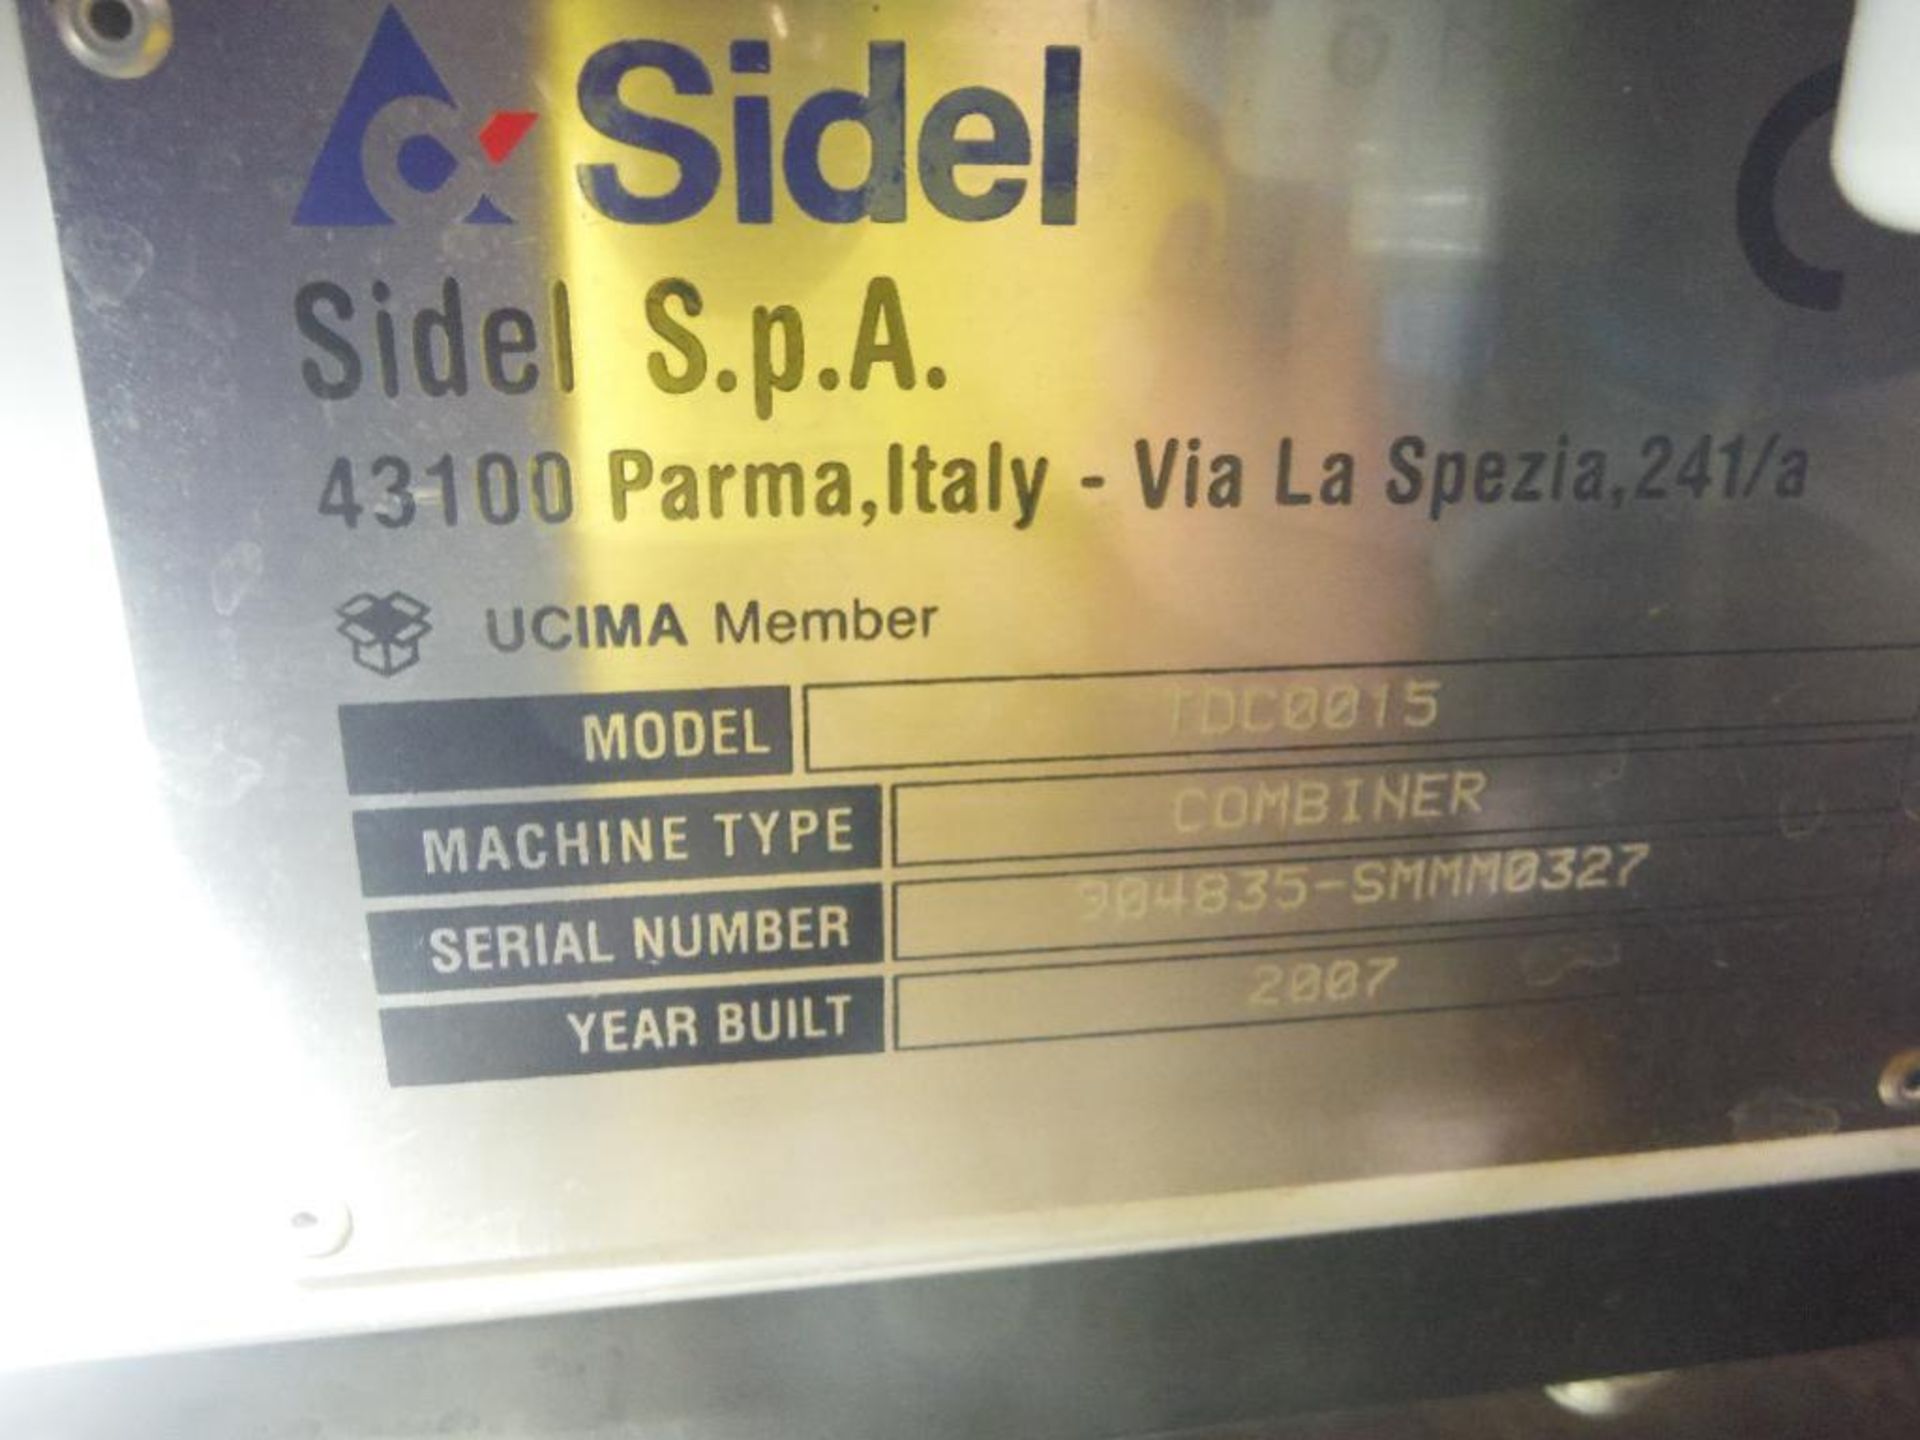 2007 Sidel combiner conveyor, Model TDC0015, SN 904835-SMMM0327, 98 in. long x 66 in. wide, with con - Image 8 of 9